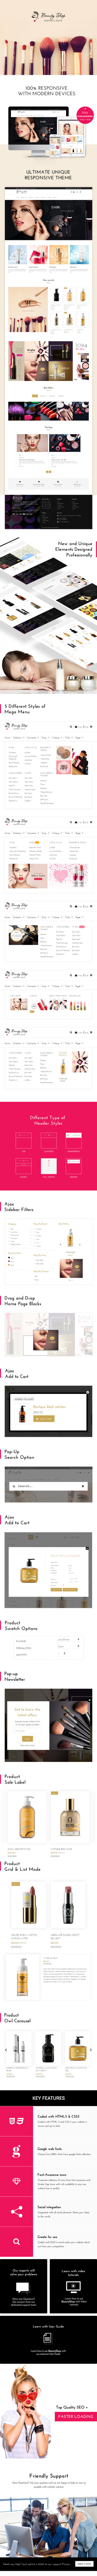 Beauty Store - Cosmetics and Fashion Beauty Shopify Theme features lists